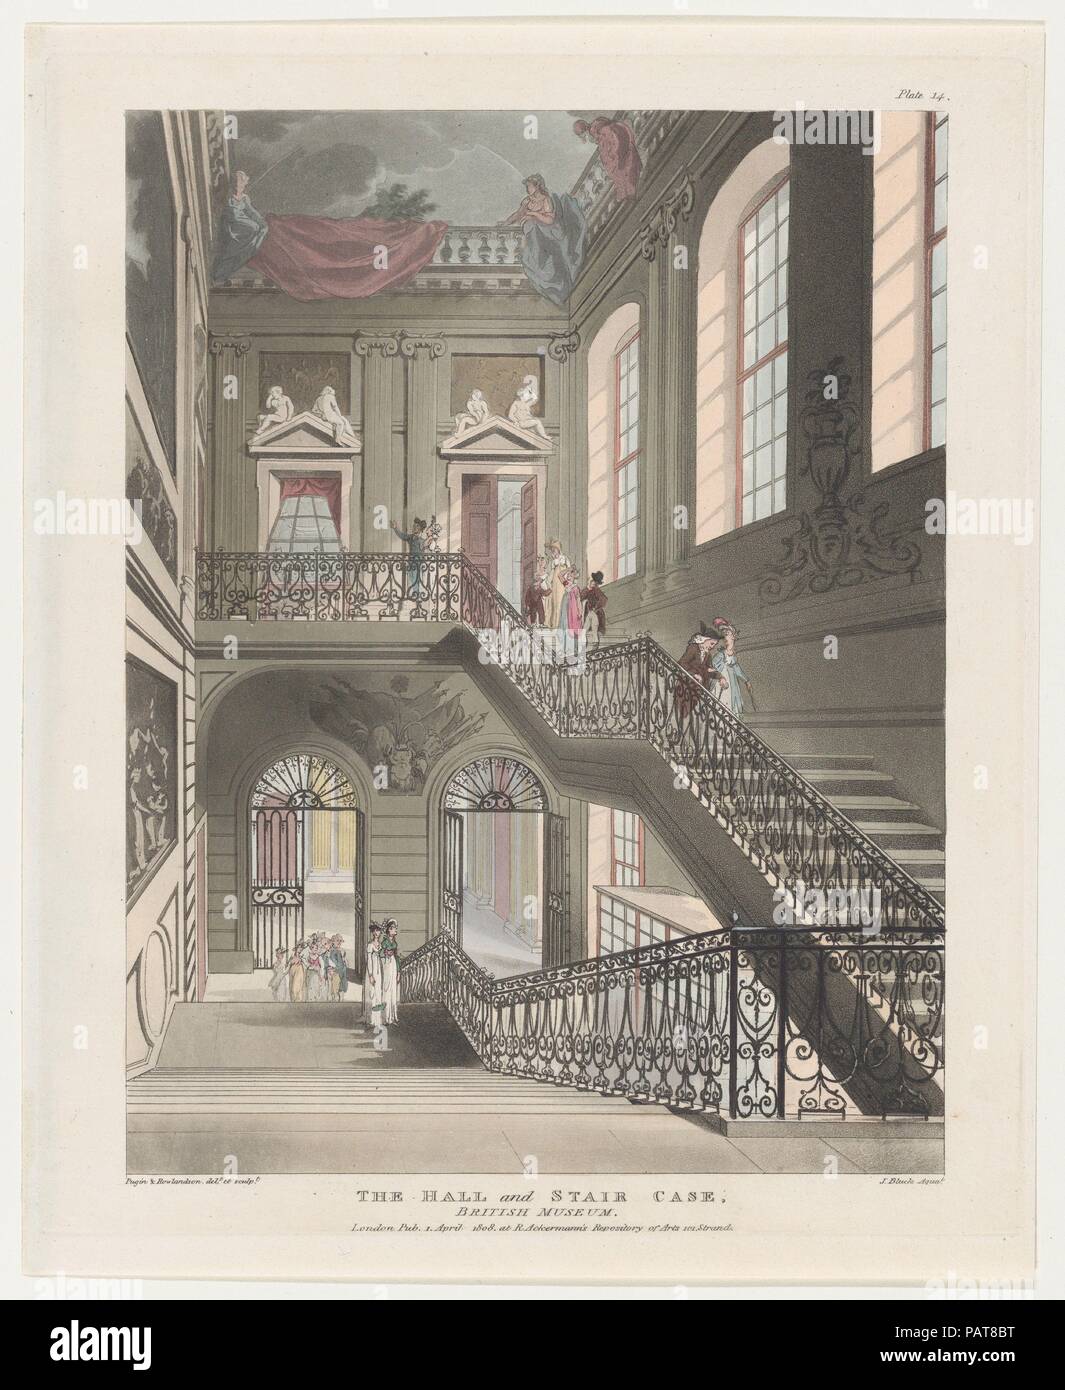 The Hall and Stair Case, British Museum (Microcosm of London, plate 14). Artist: Designed and etched by Thomas Rowlandson (British, London 1757-1827 London); Designed and etched by Auguste Charles Pugin (British (born France), Paris 1768/69-1832 London); Aquatint by John Bluck (British, 1791-1832). Dimensions: Sheet: 11 3/4 × 9 1/2 in. (29.8 × 24.2 cm)  Plate: 11 1/16 × 9 5/16 in. (28.1 × 23.6 cm). Publisher: Rudolph Ackermann, London (active 1794-1829). Series/Portfolio: Microcosm of London. Date: April 1, 1808. Artwork also known as: THE MICROCOSM OF LONDON. Museum: Metropolitan Museum of Ar Stock Photo